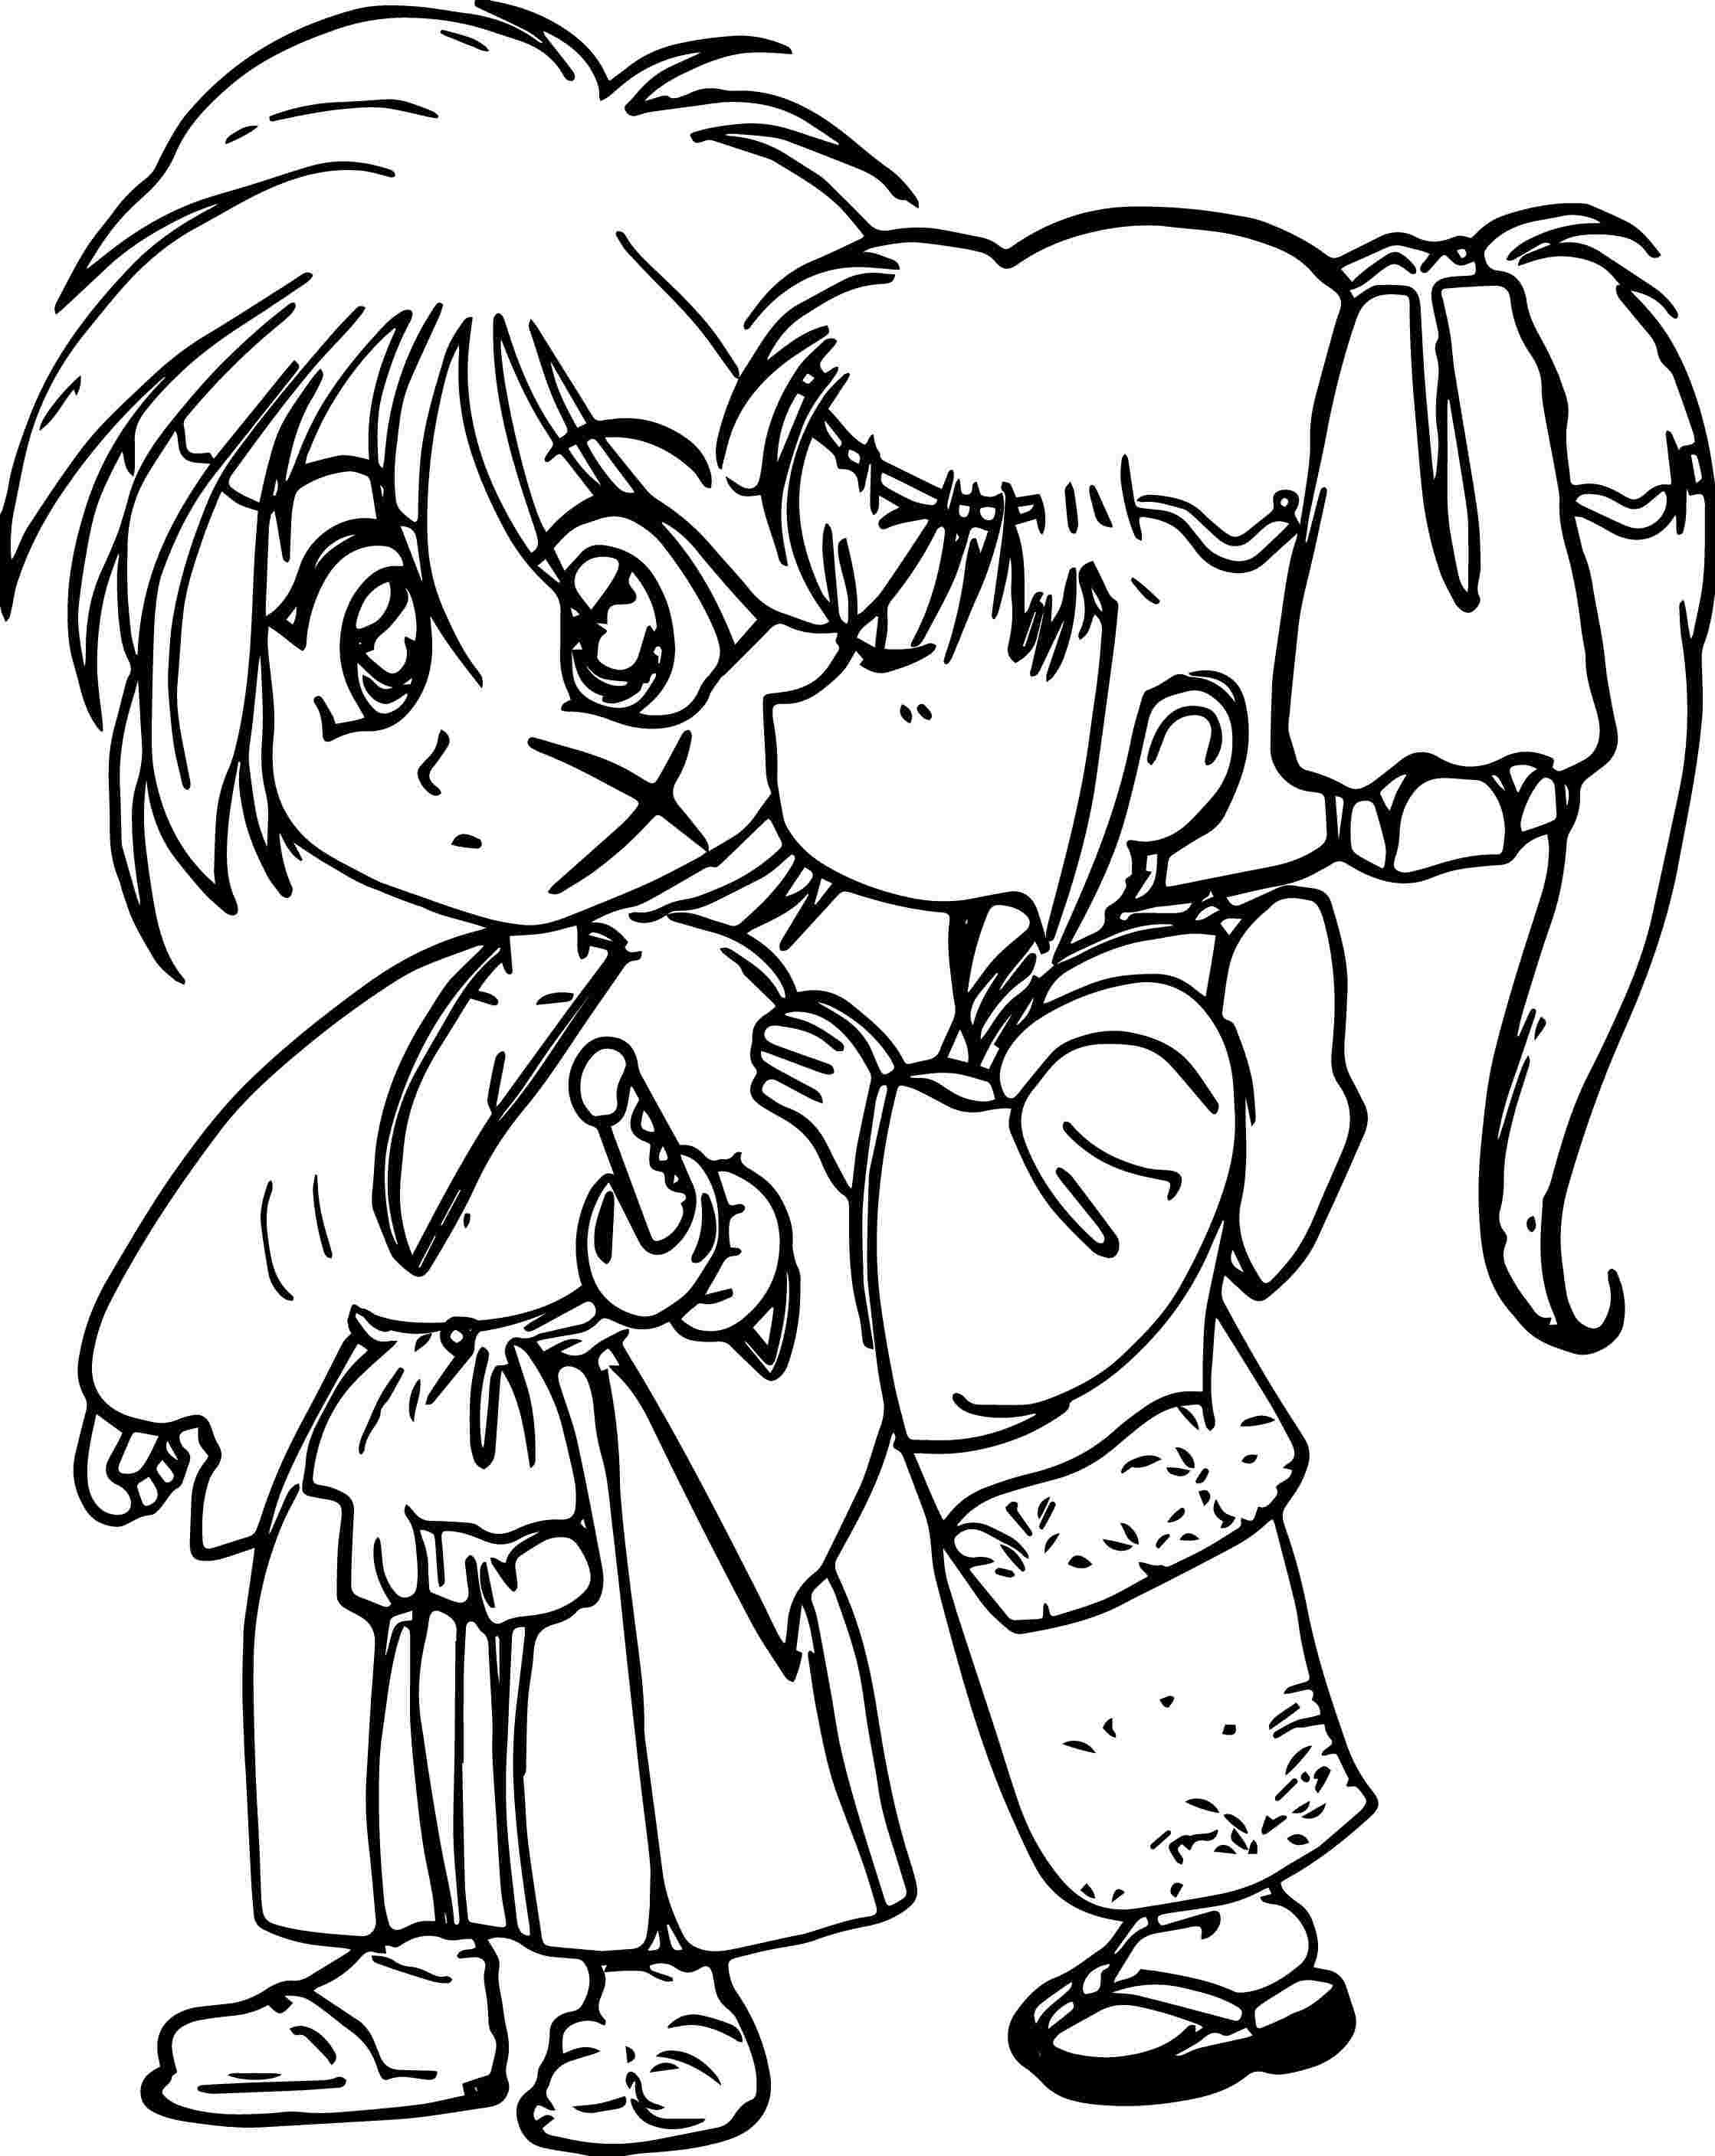 Coloring Pages Of Boy And Girl Kissing 20 Cute Anime Couples ...